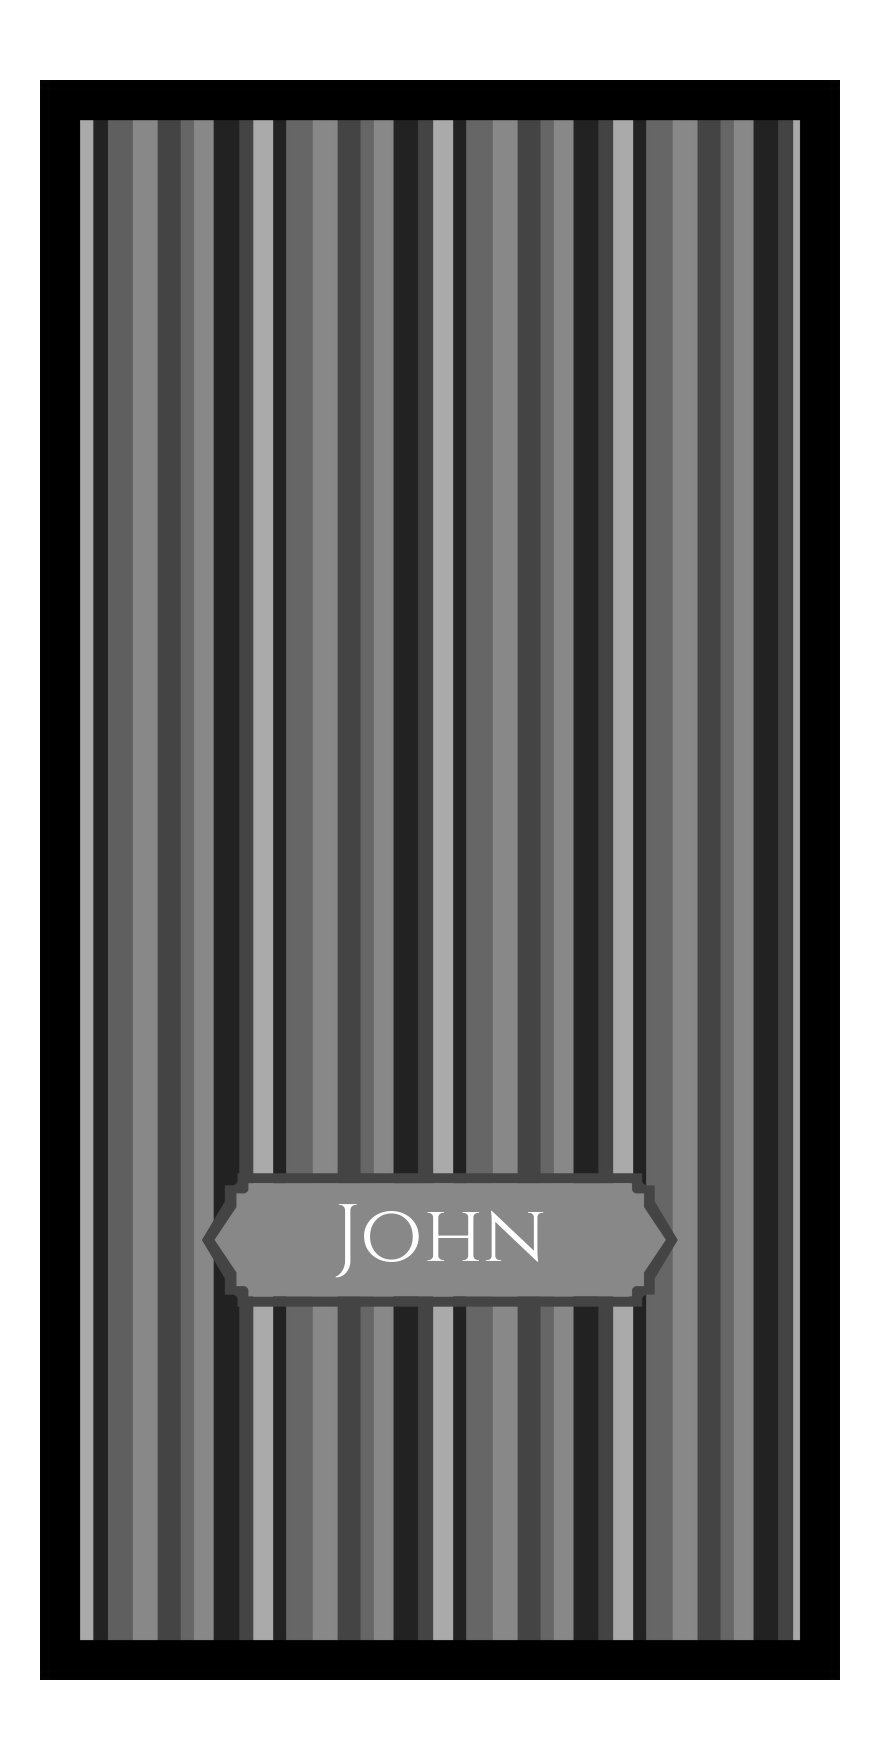 Personalized 5 Color Stripes 4 Repeat Beach Towel - Vertical - Shades of Grey - Oblong Off Center Frame - Front View